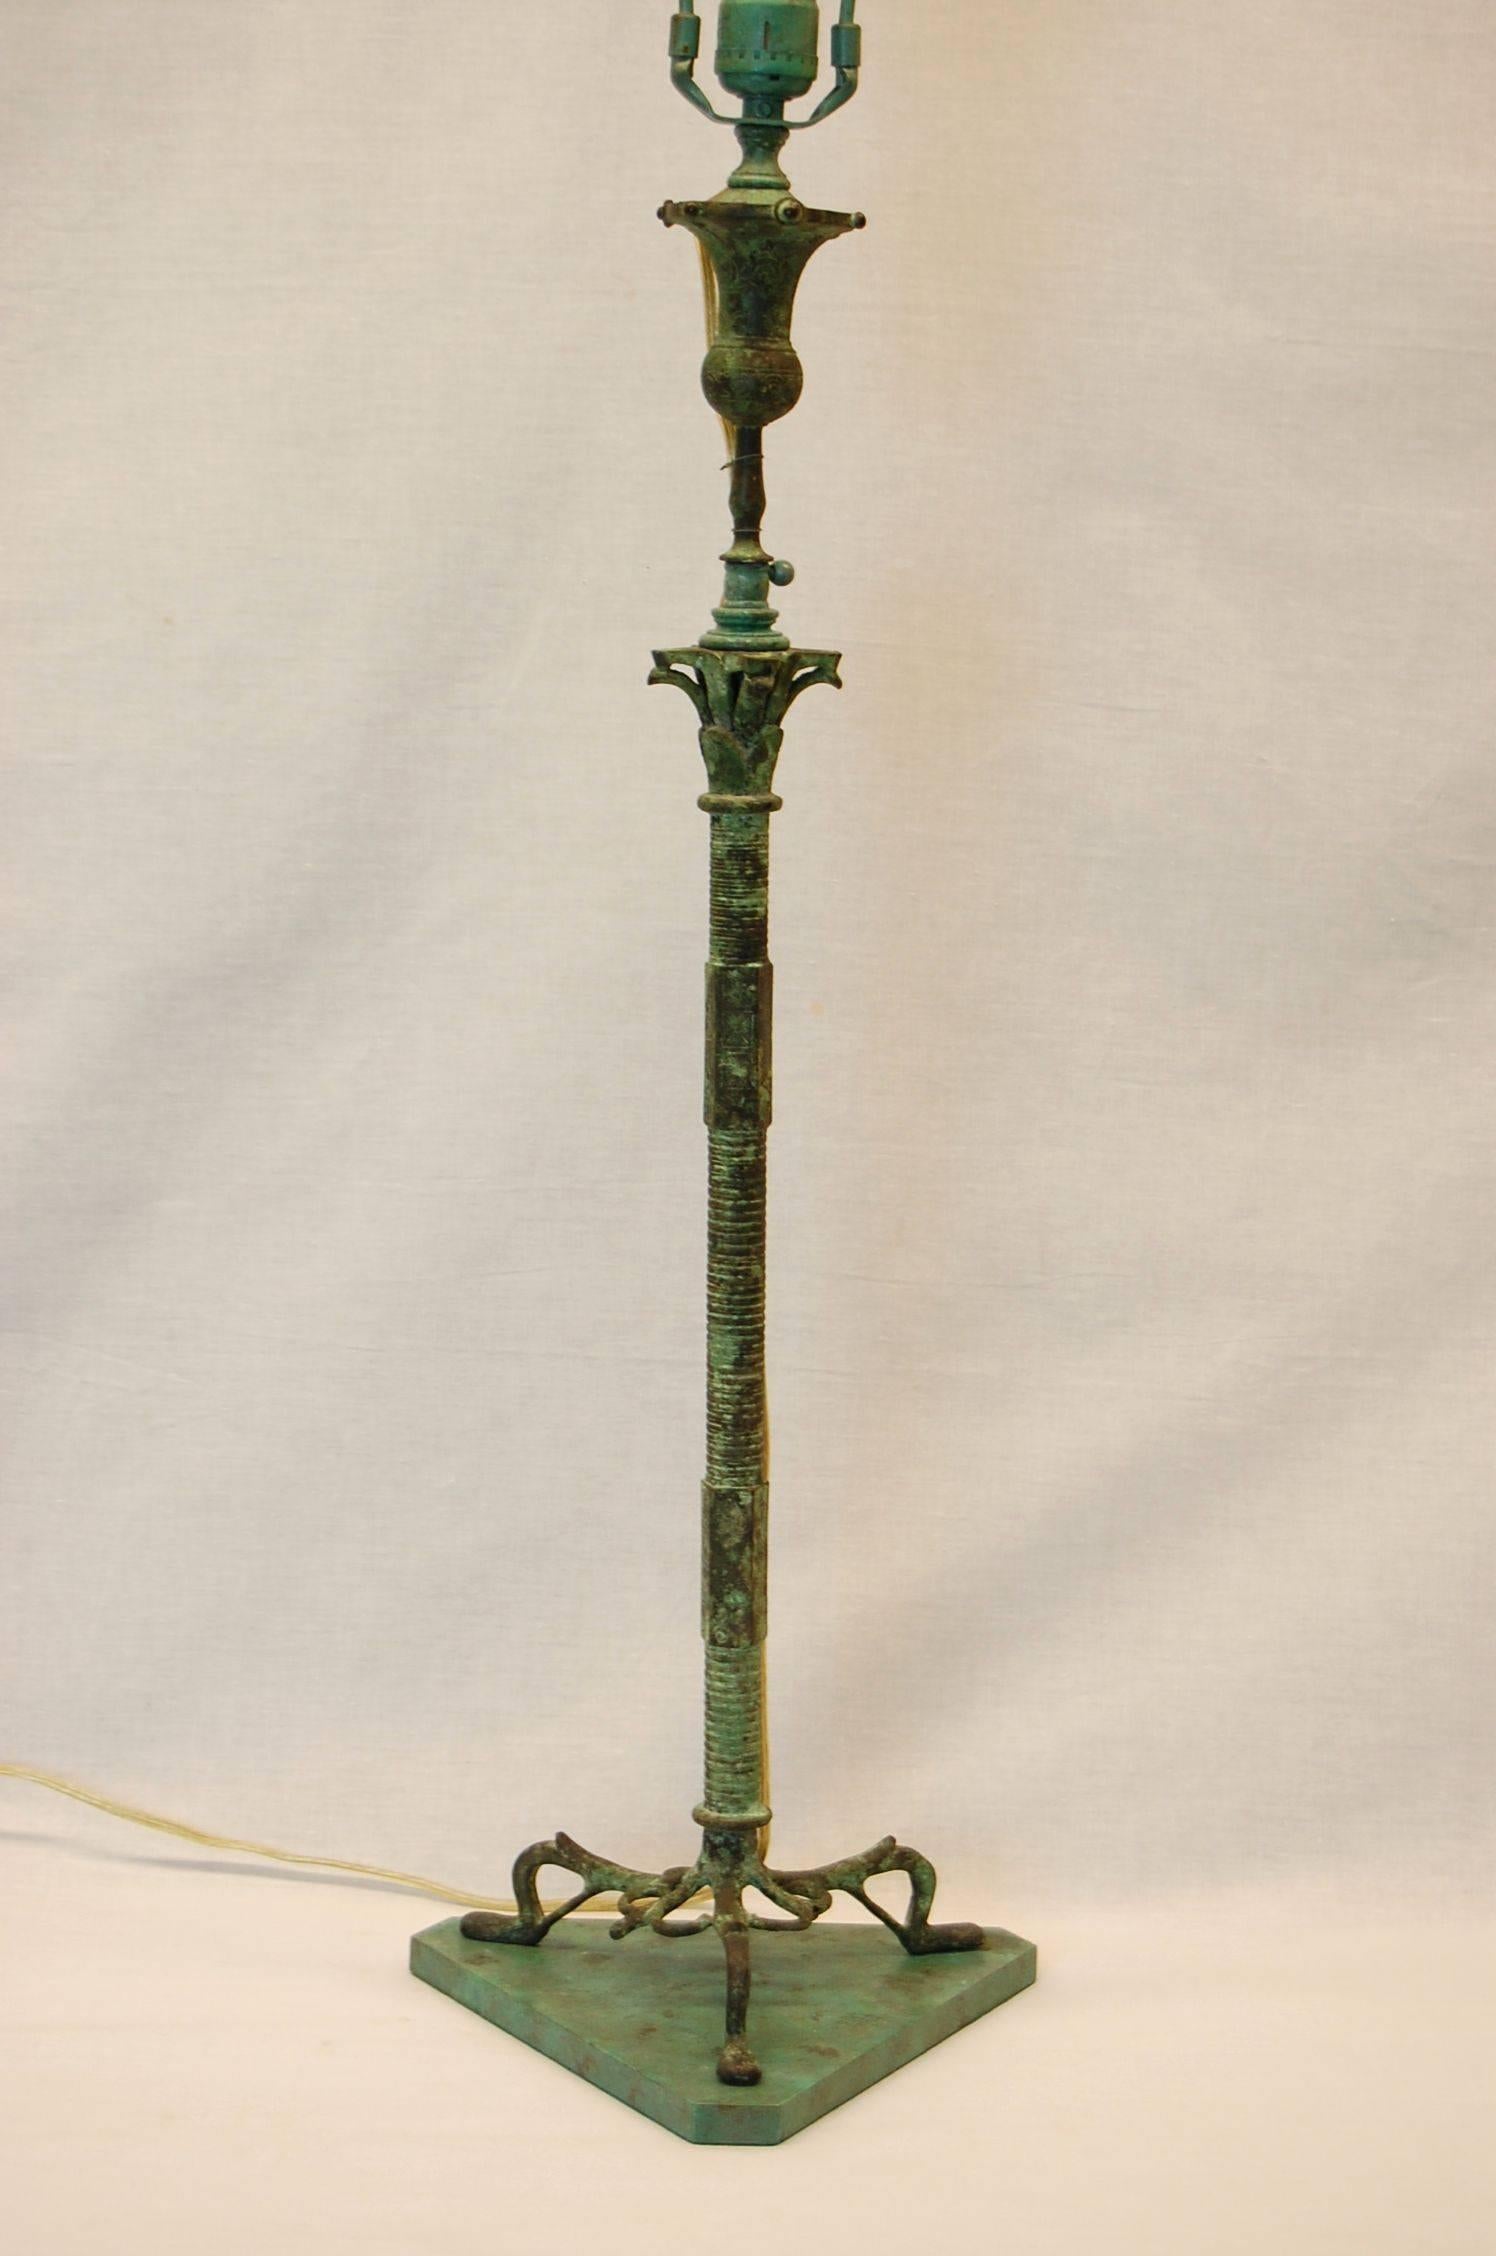 This adjustable candelabrum stands 24 1/2 inches tall, (without any of the modern attachments) and extends higher by using the small thumbturn @ the top of the candlestick. (Shade height is 34 inches above the tabletop) Wired as a lamp w/ three-way